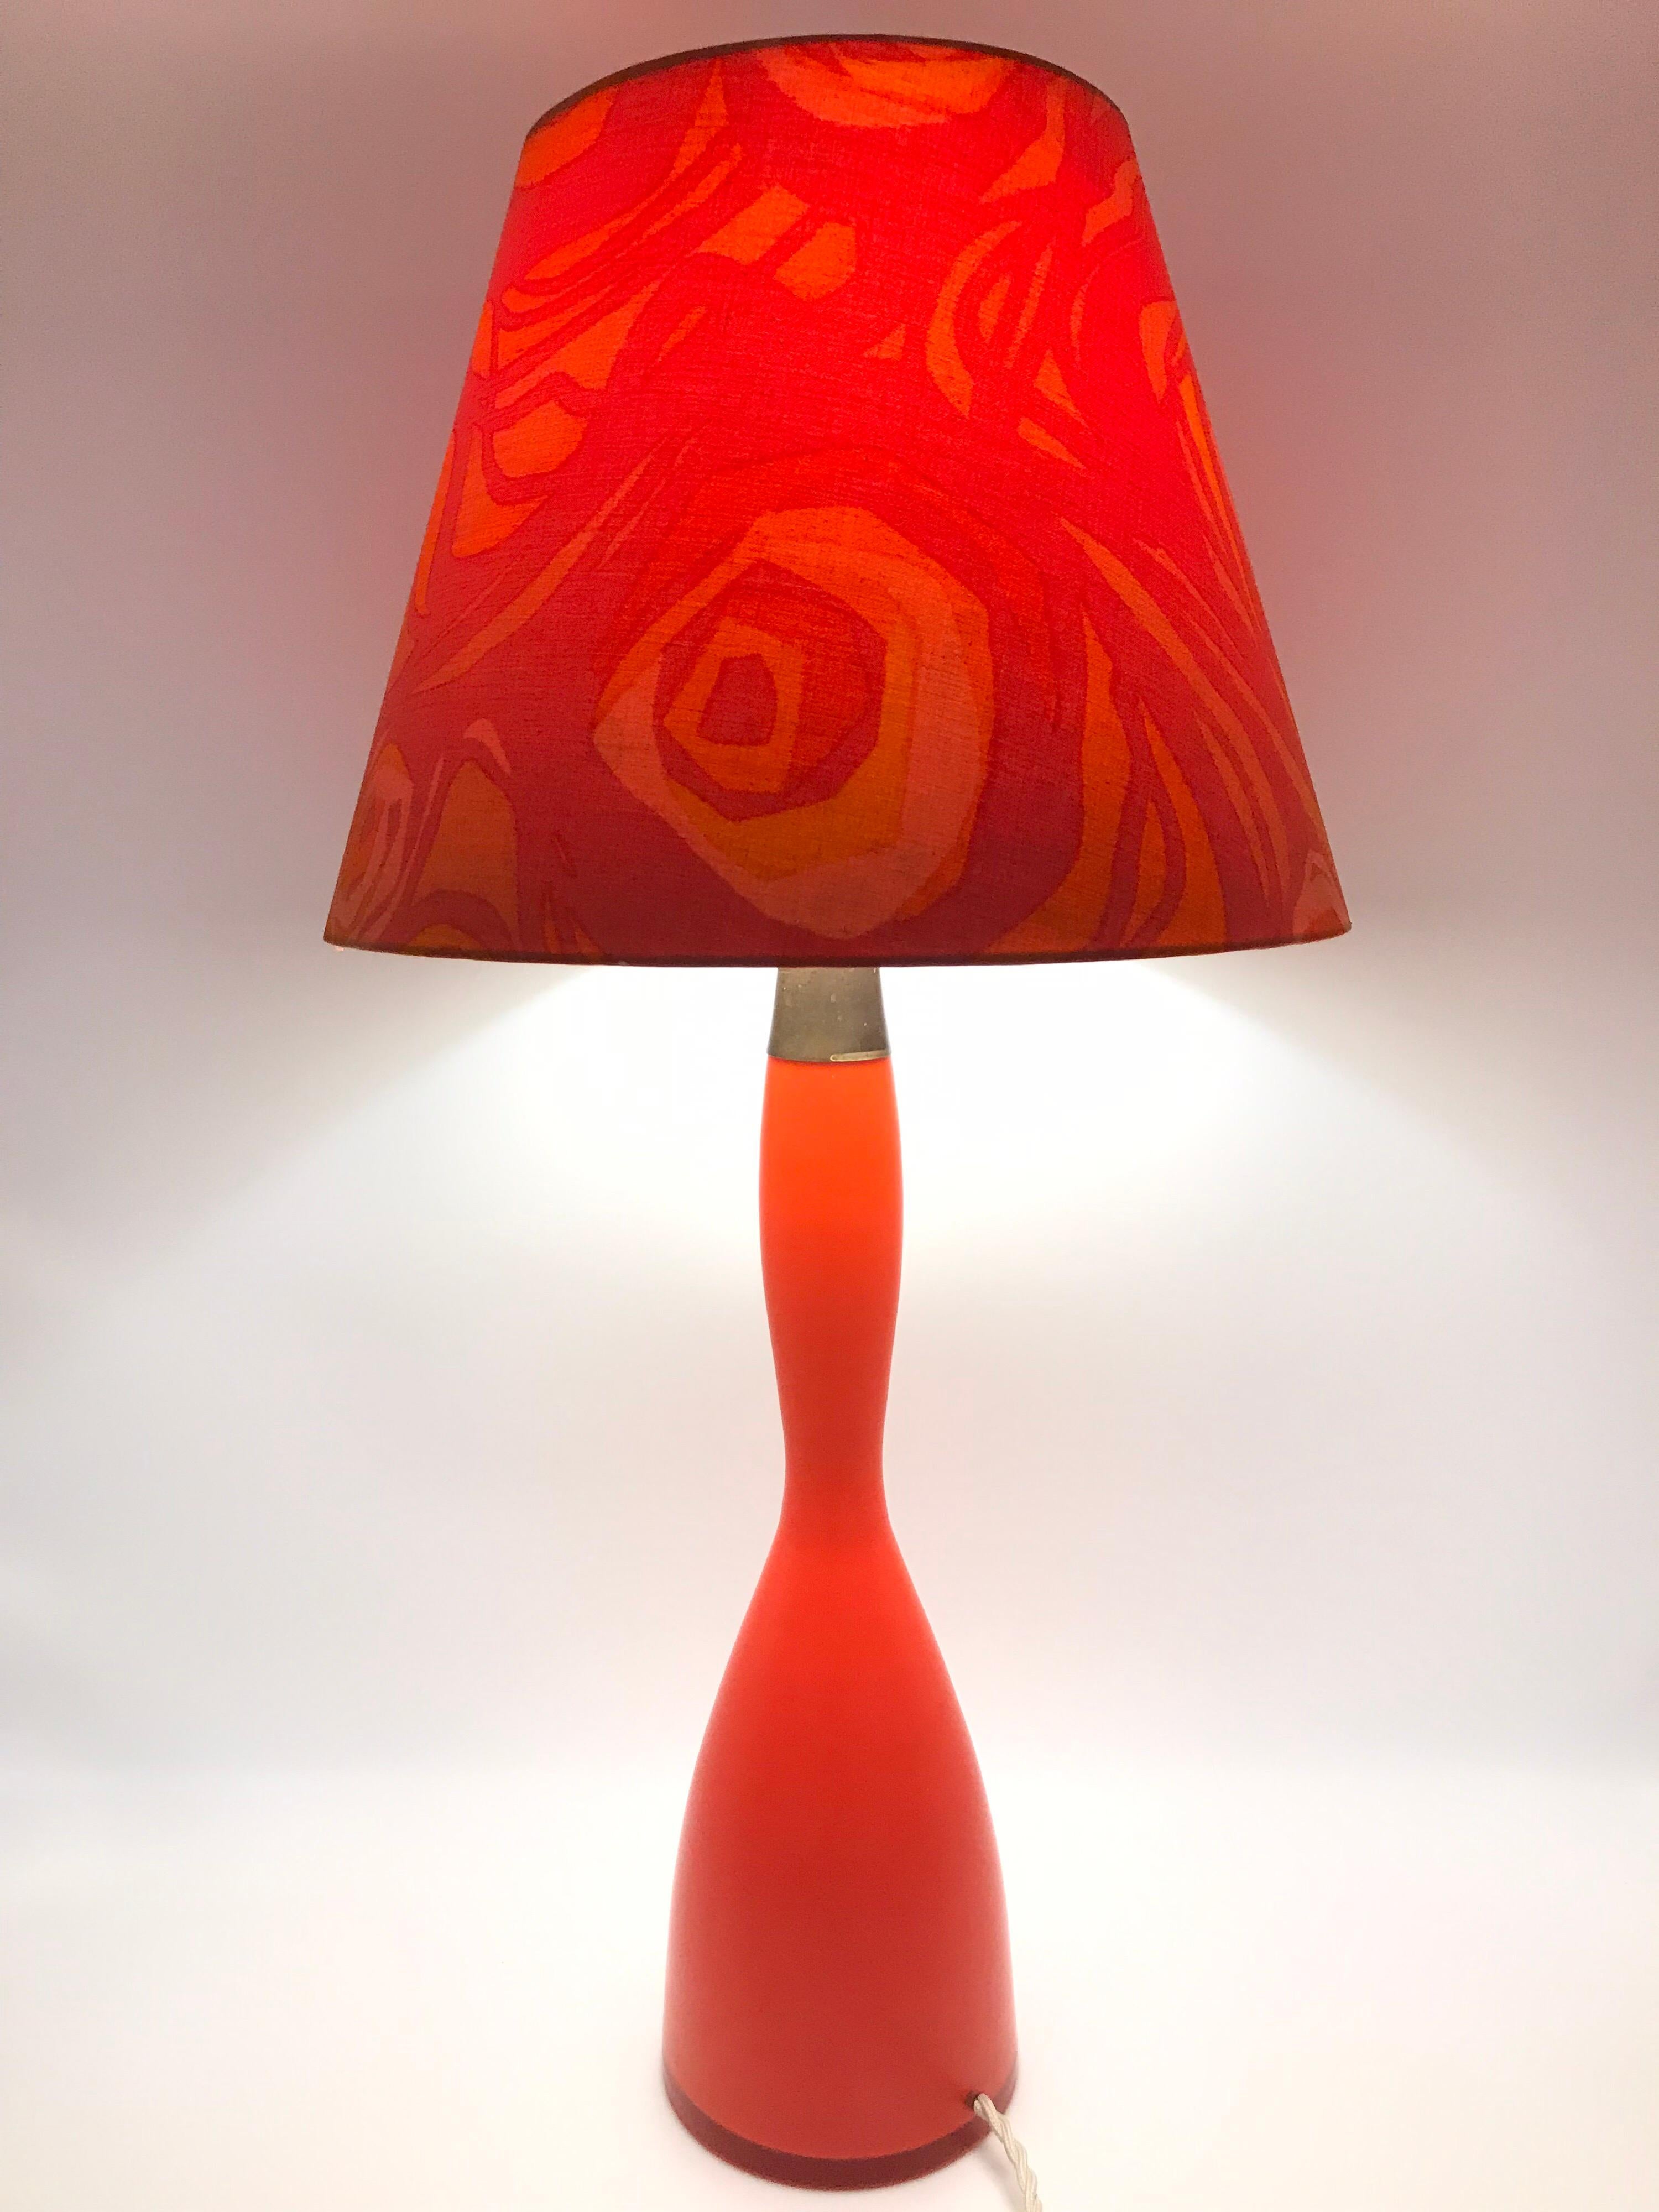 Stunning Retro Vintage Table Lamp from the 1960s Made by Kastrup Glass Denmark 7